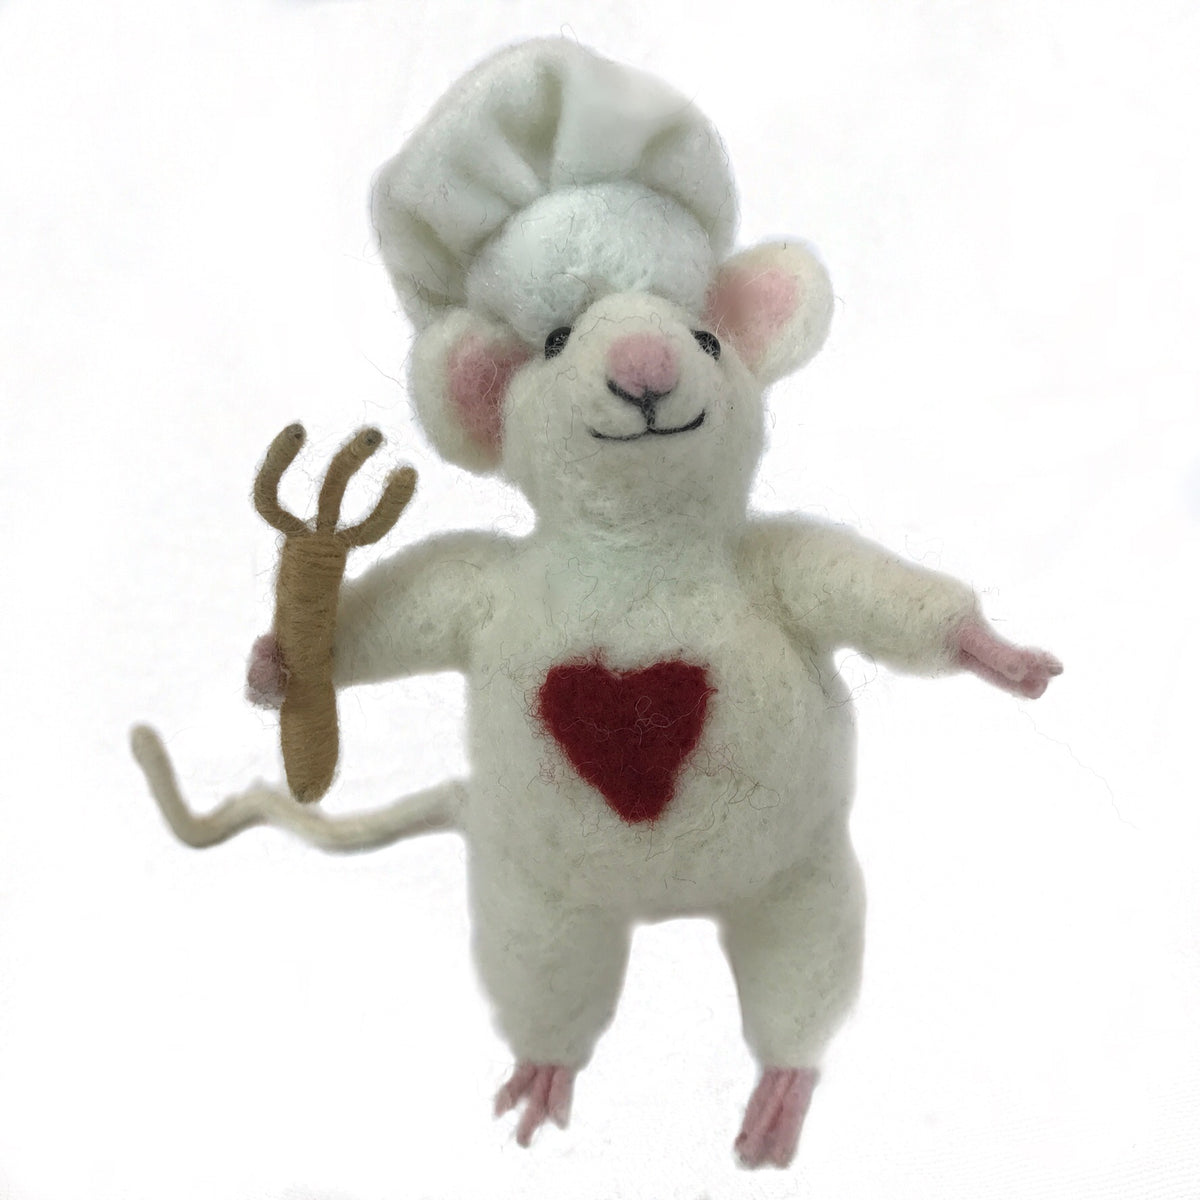 Mouse Figurine or Ornament